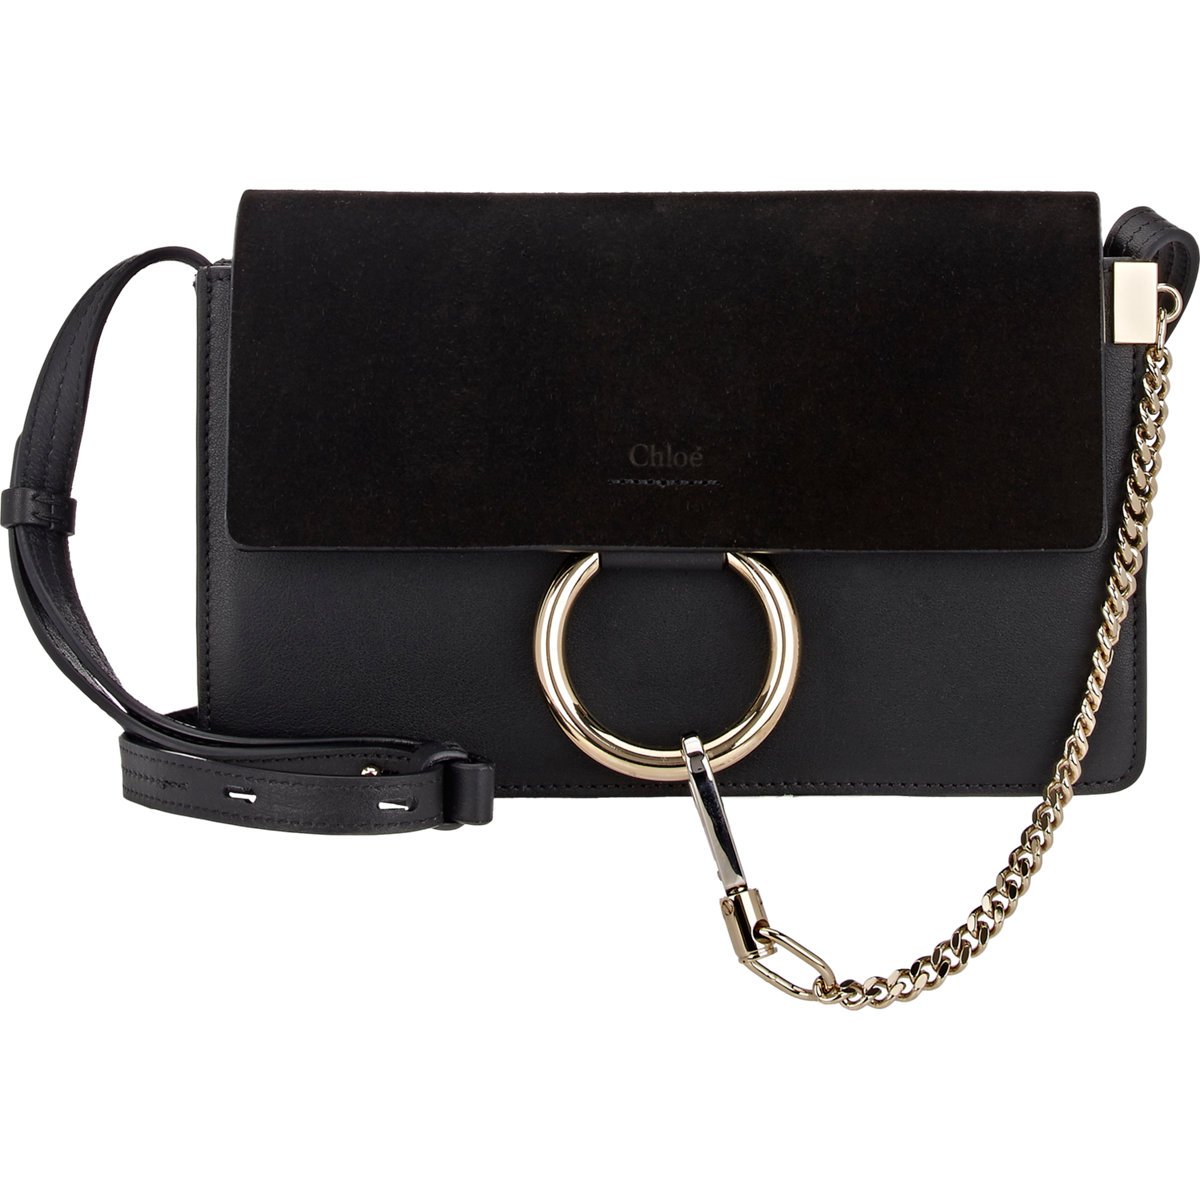 Chlo Faye Small Leather and Suede Shoulder Bag in Black | Lyst  